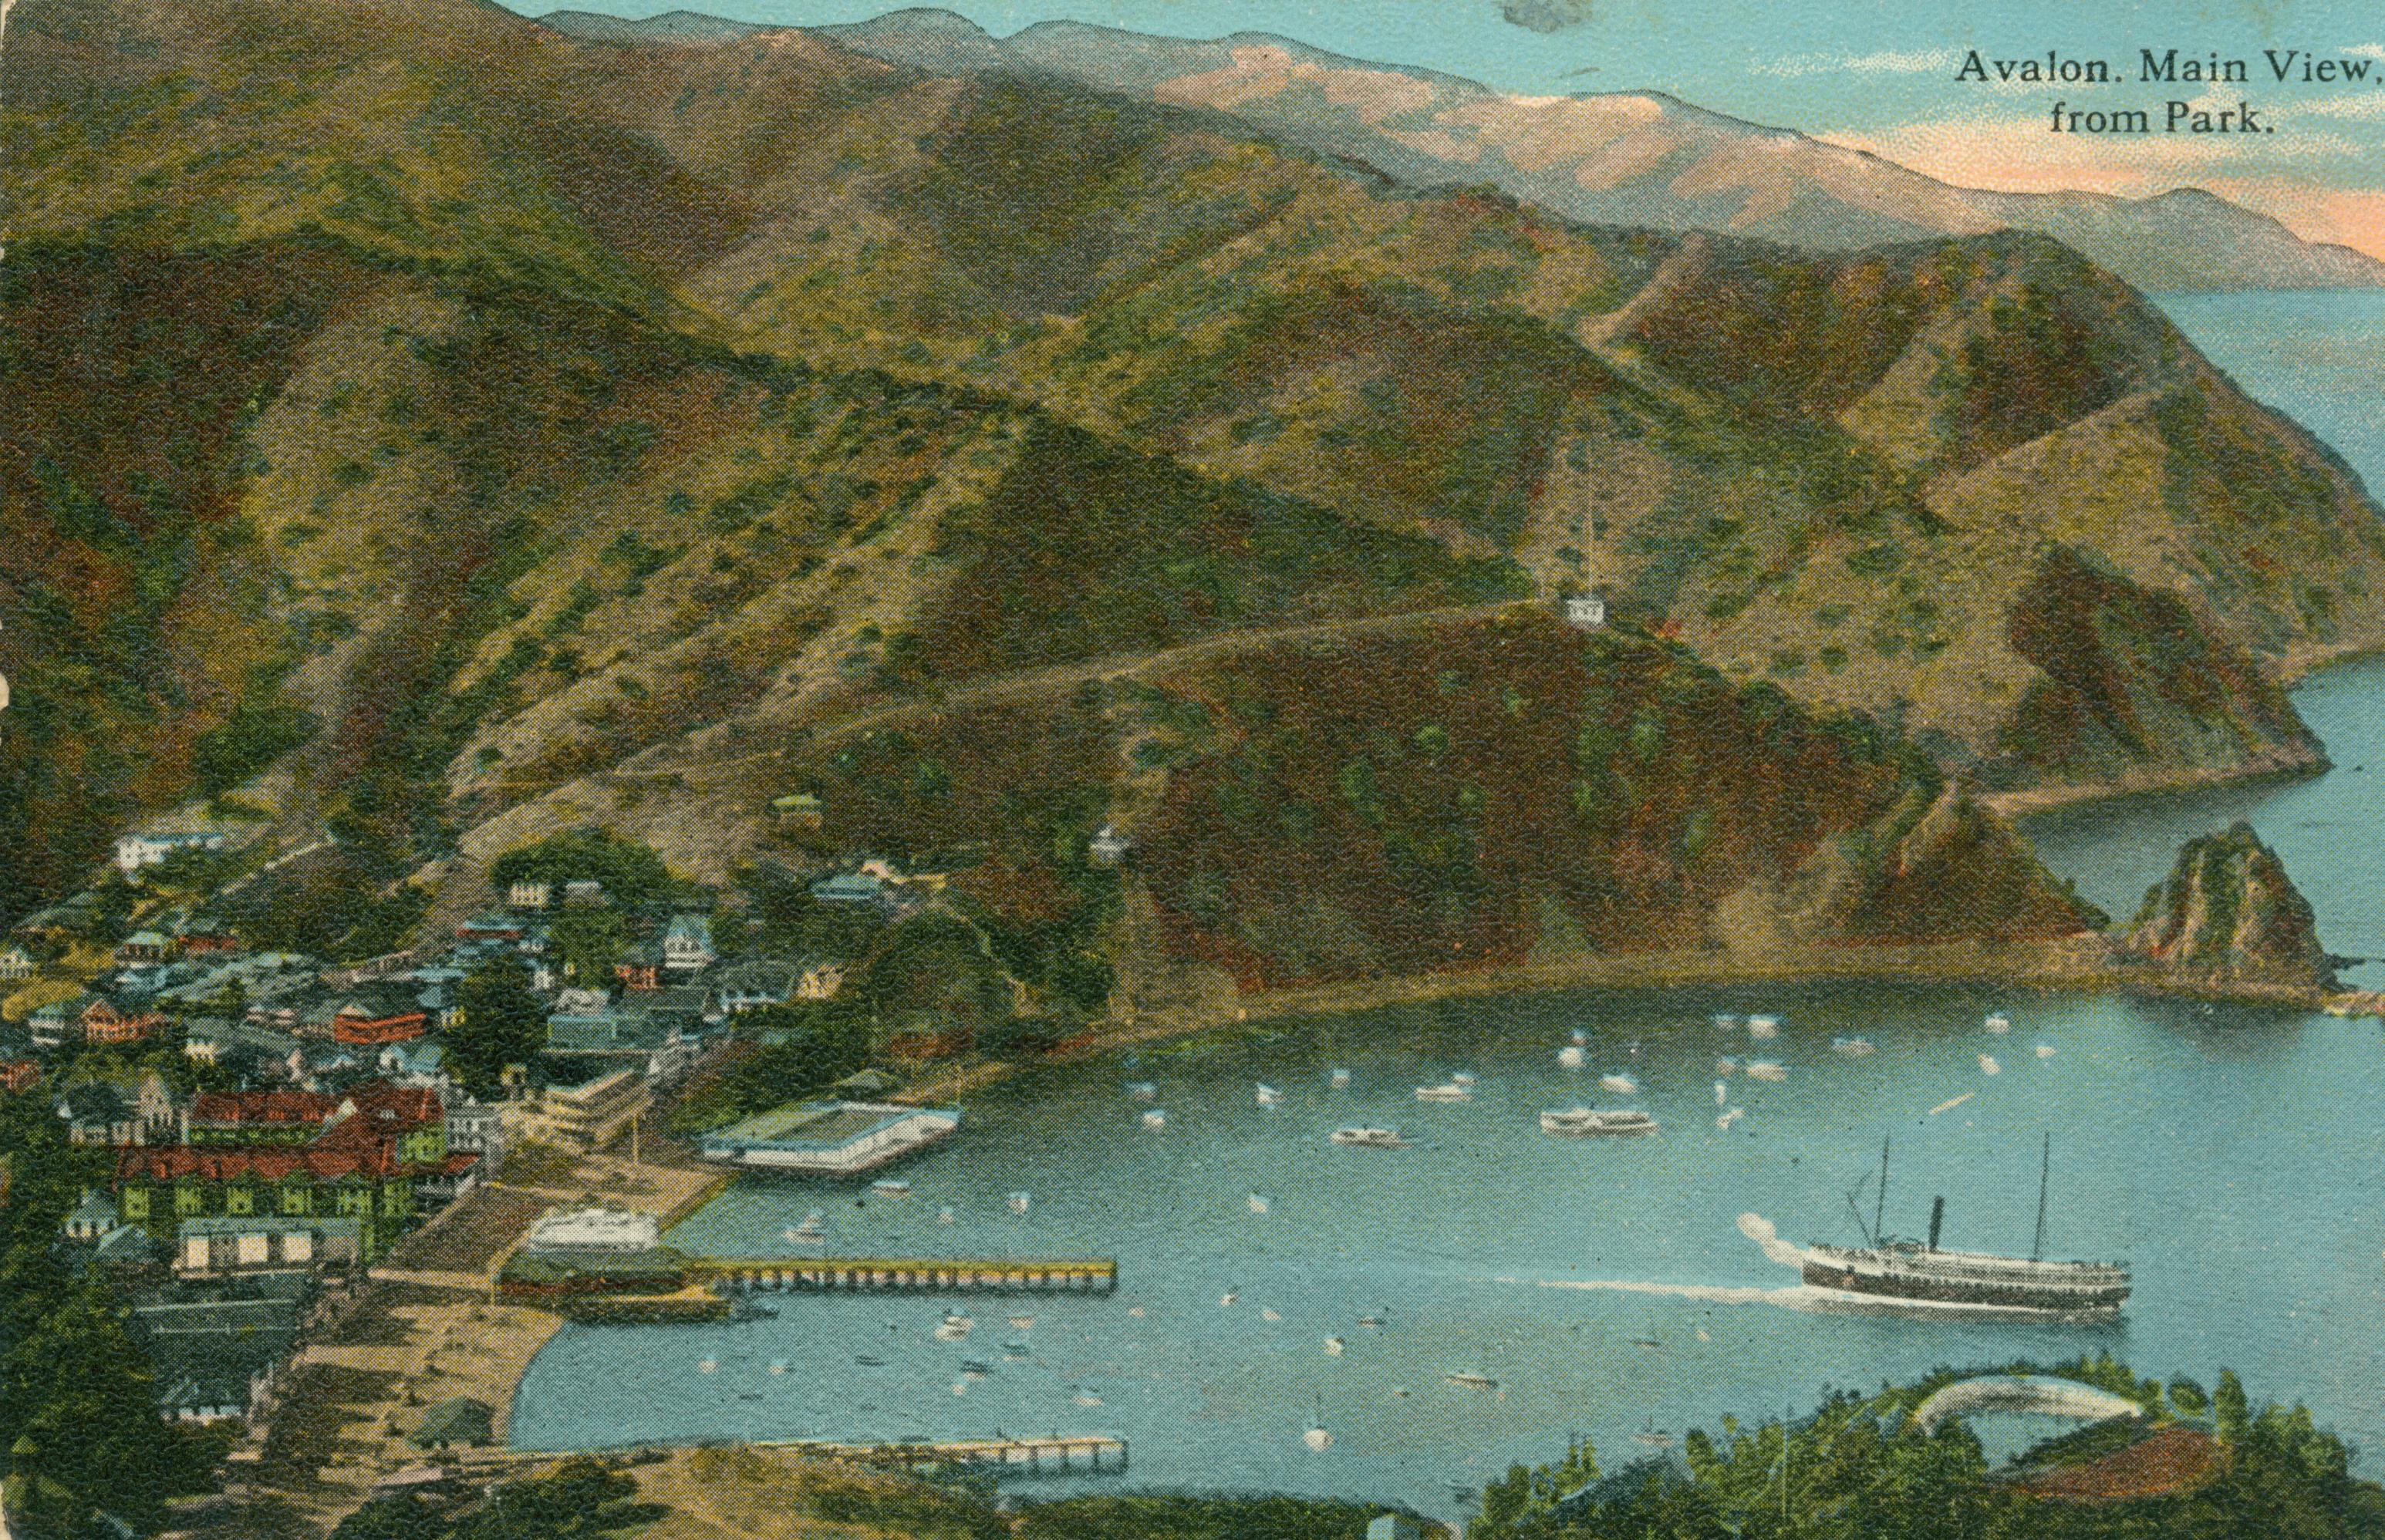 This postcard shows a bird's eye view of Avalon and the harbor on Catalina Island